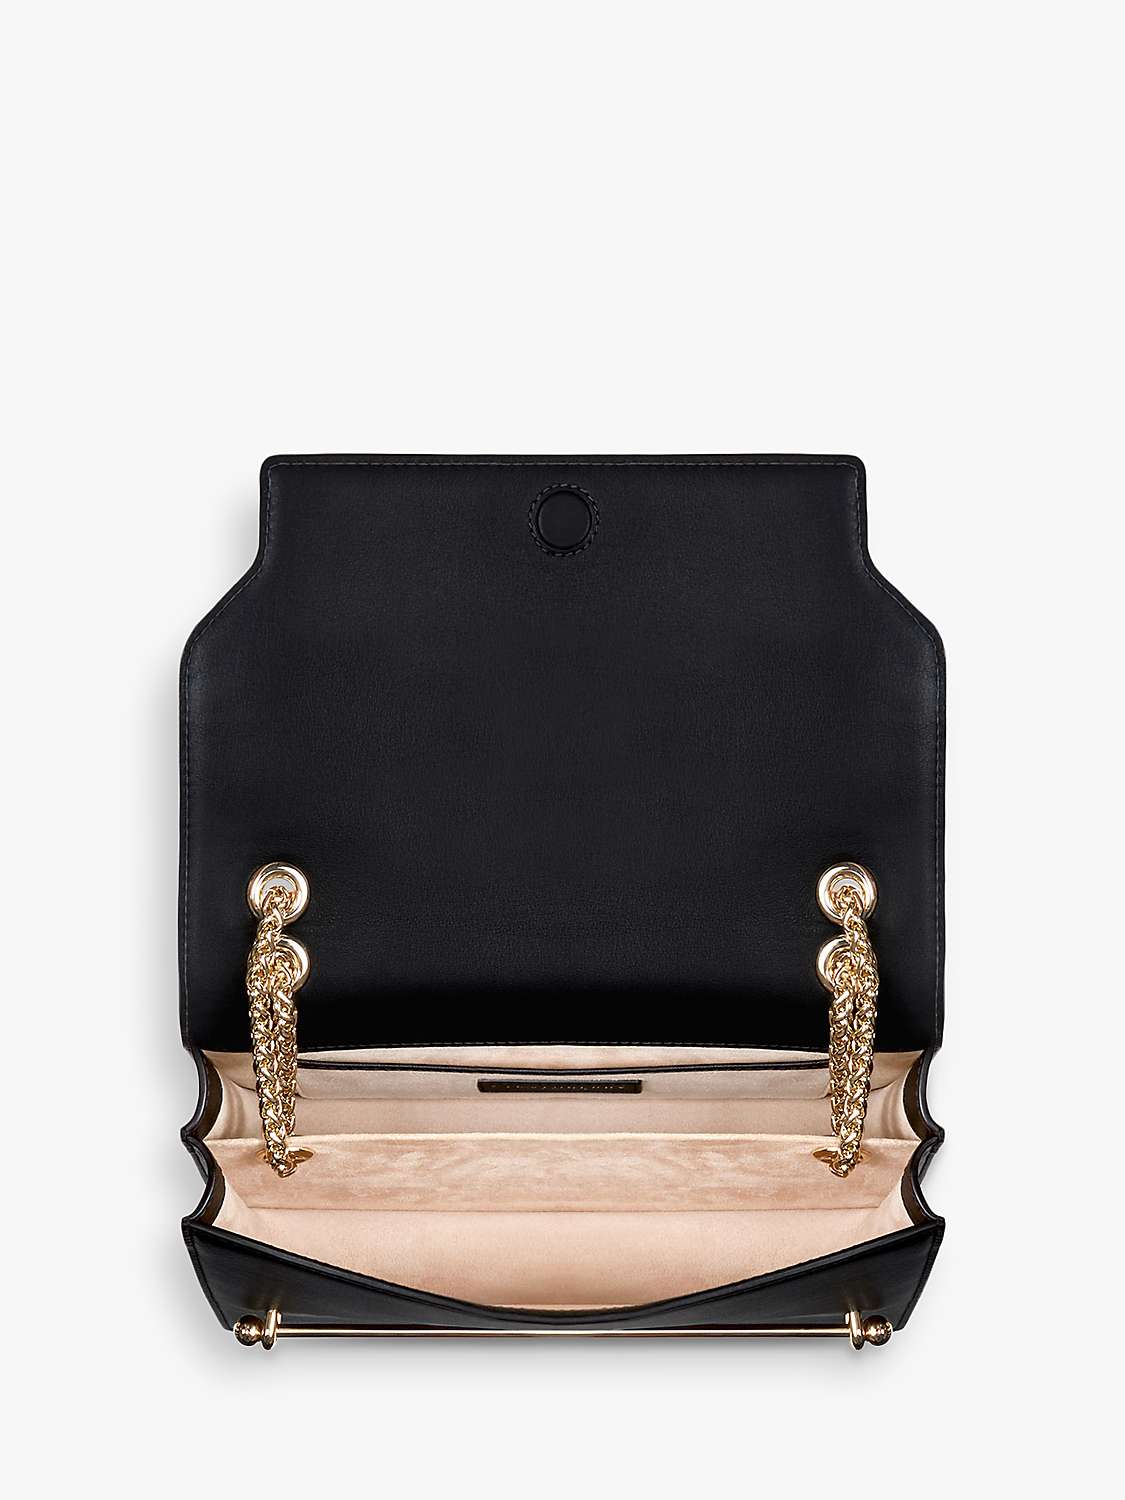 Buy Strathberry East/West Leather Cross Body Bag Online at johnlewis.com